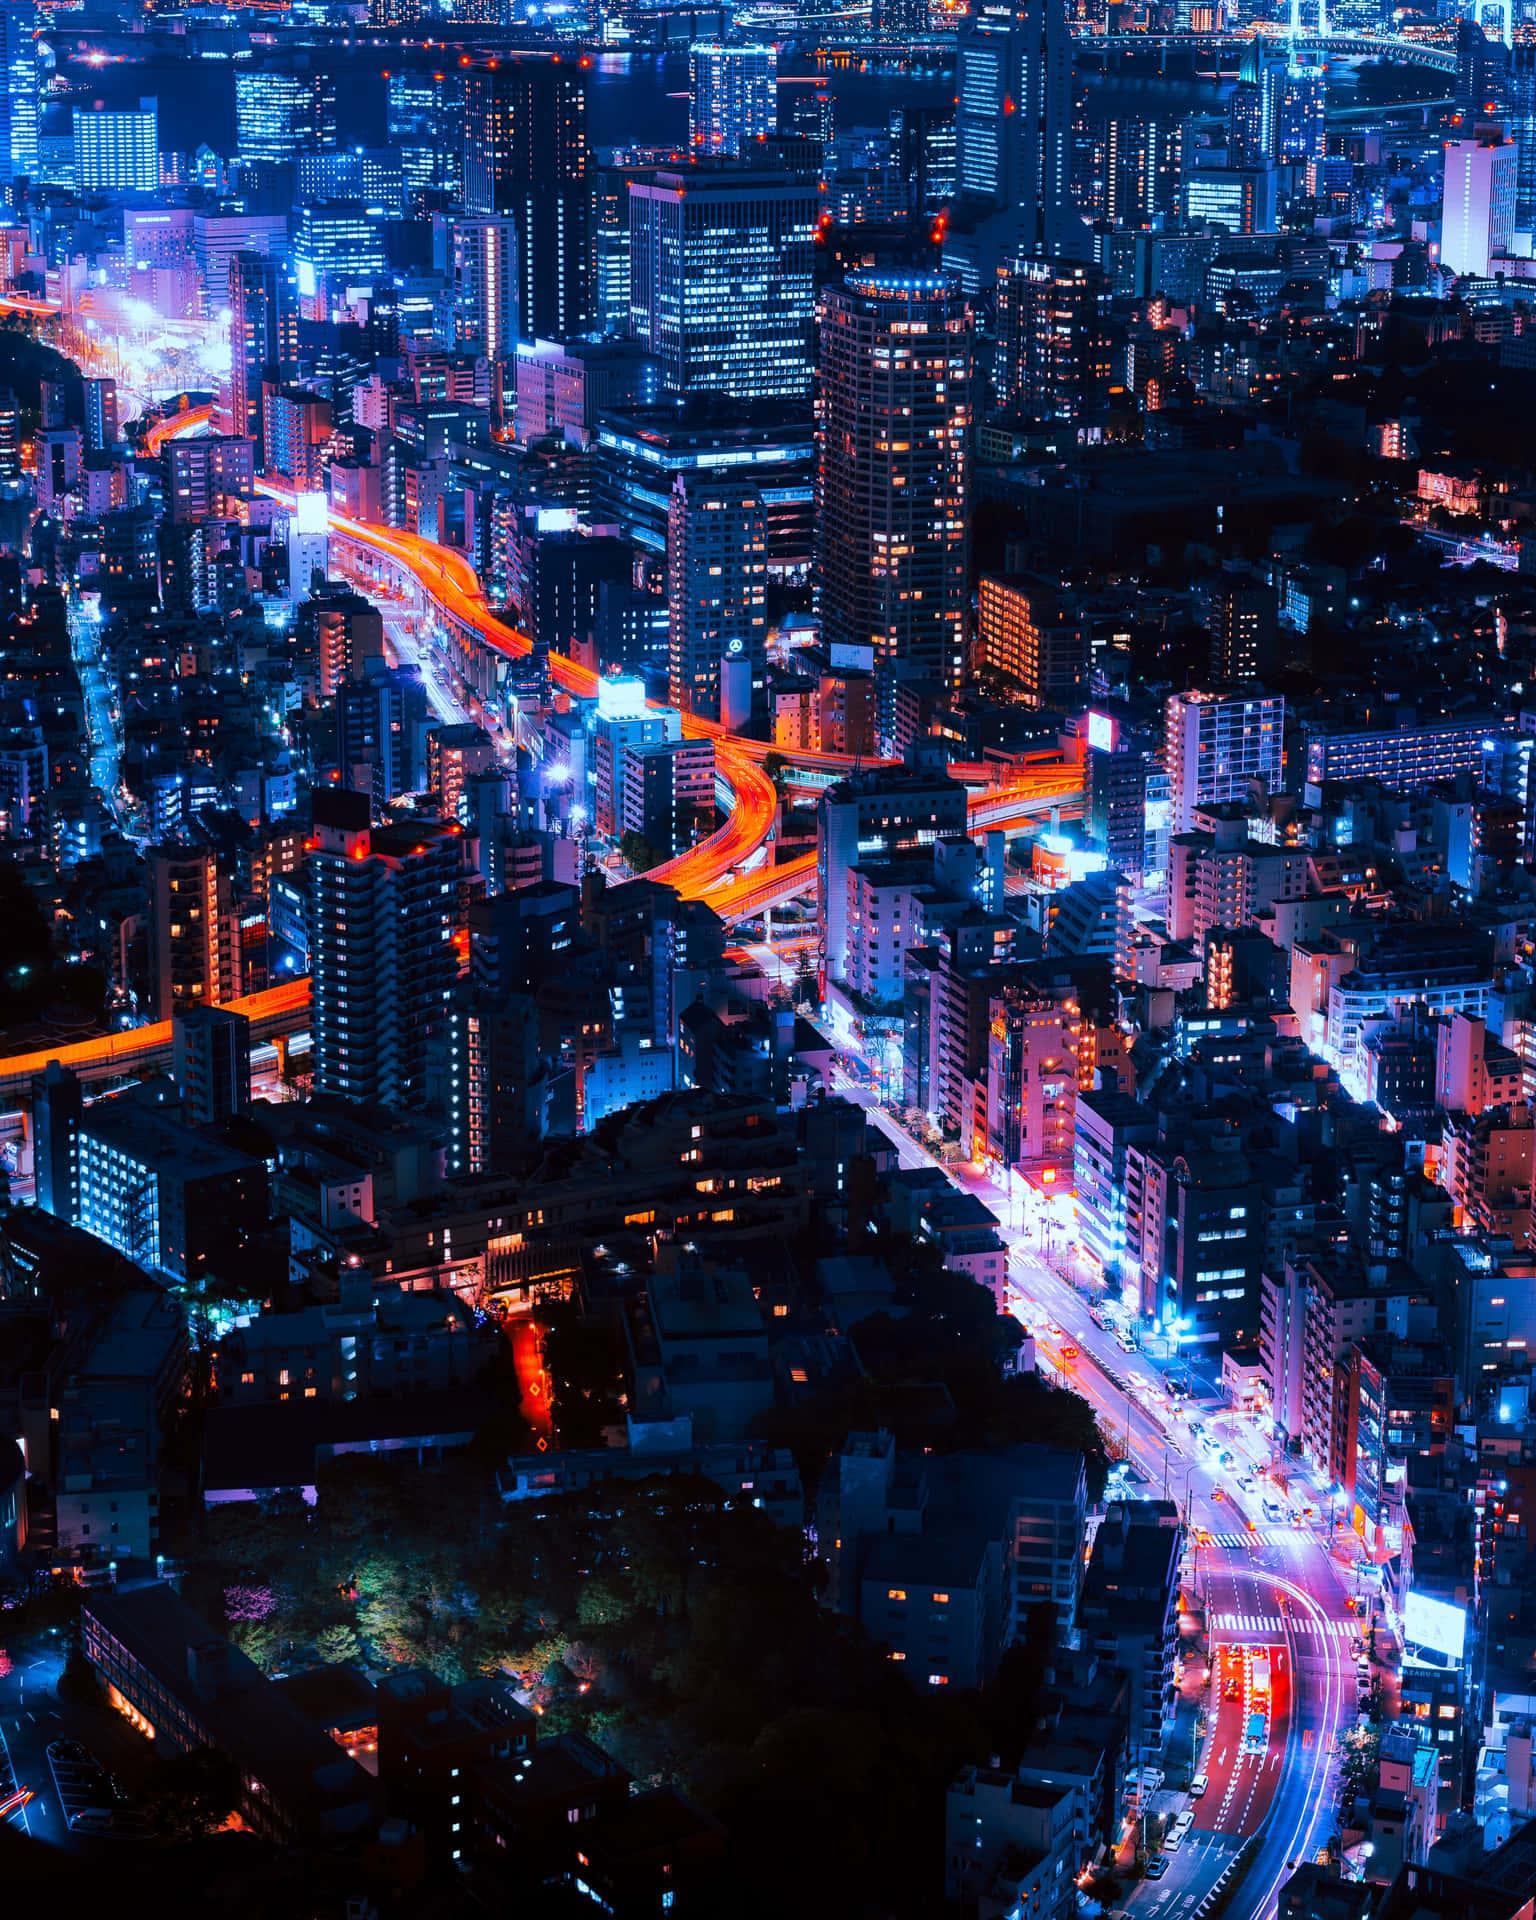 Comprehensive City View At Night Wallpaper